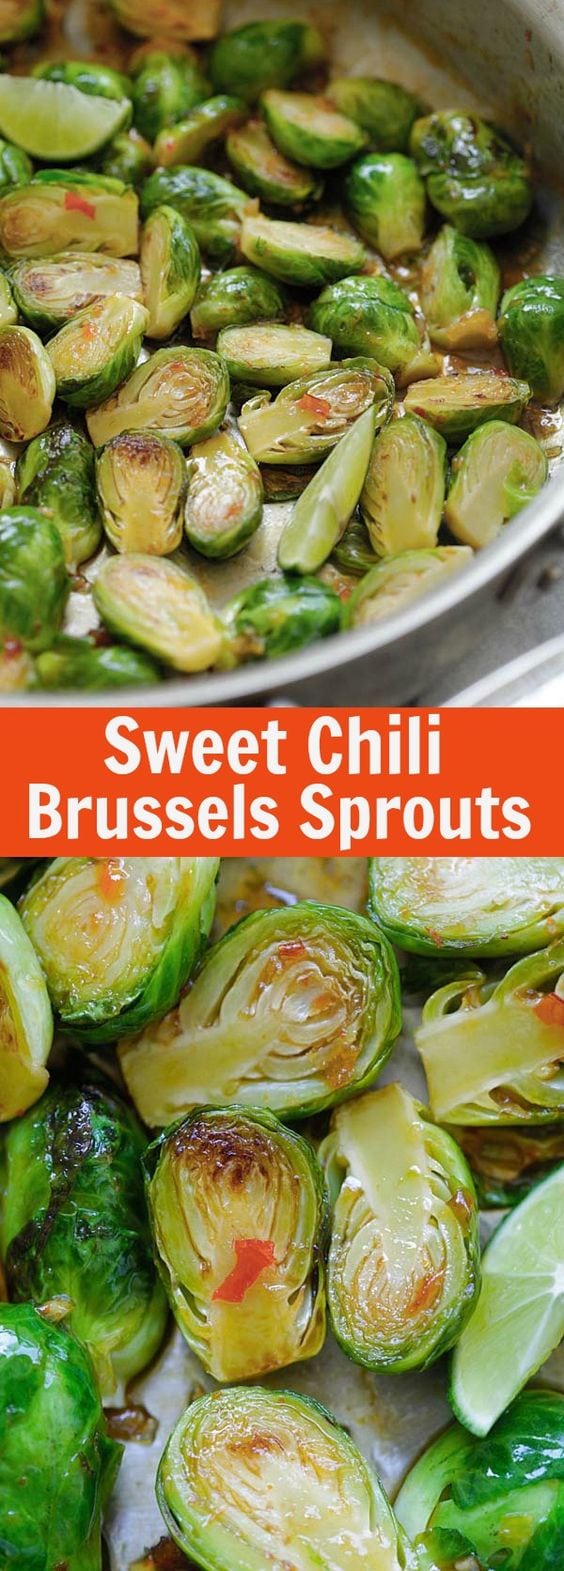 Sweet Chili Brussels Sprouts – easy and delicious sauteed brussels sprouts with Thai sweet chili sauce. Takes 15 mins to make | rasamalaysia.com